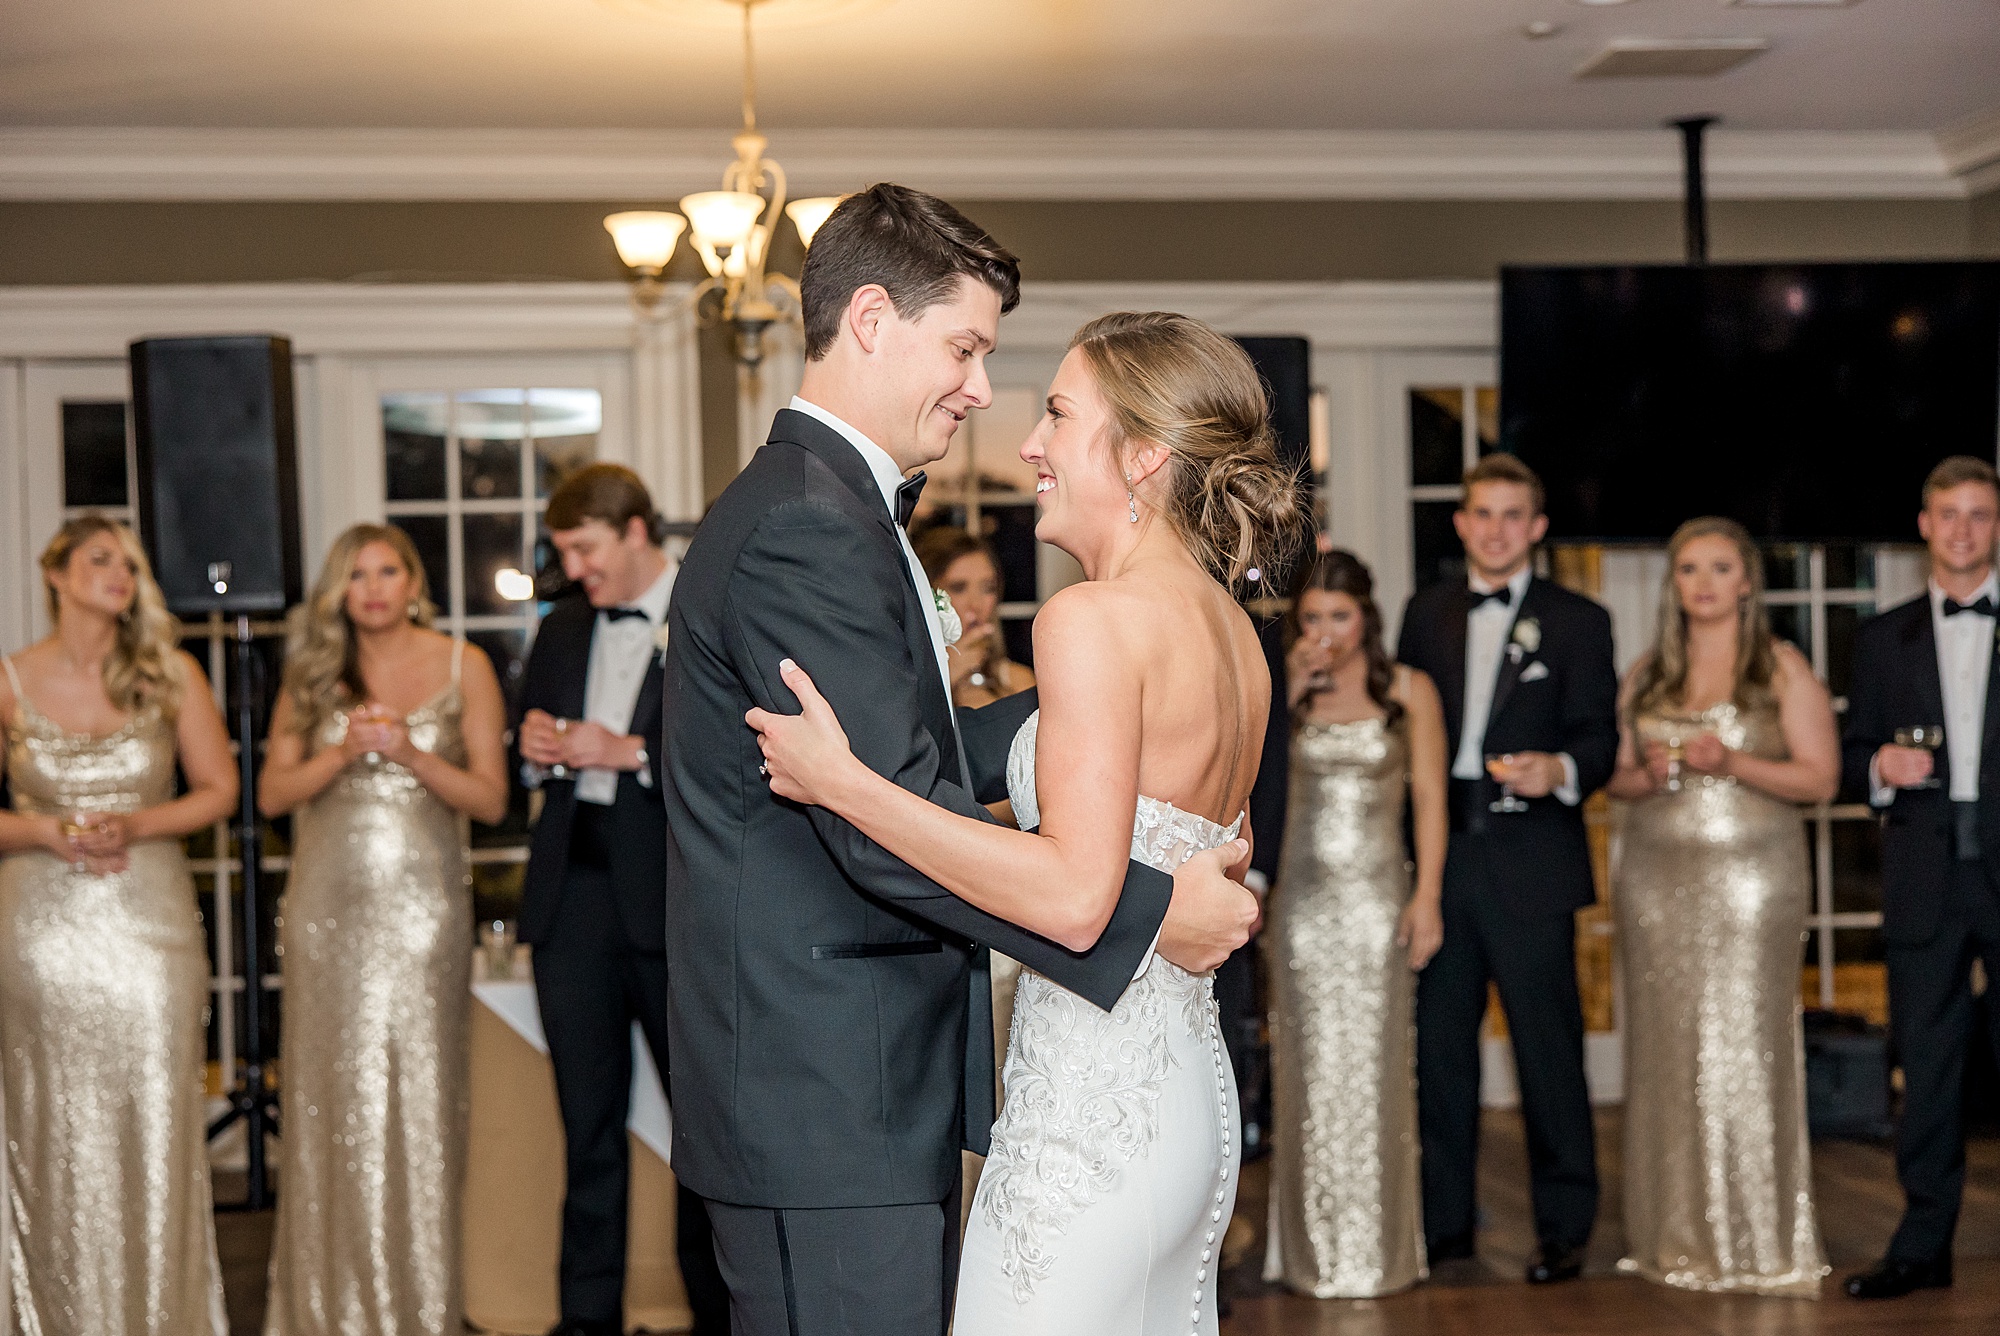 newlyweds share first dance as husband and wife